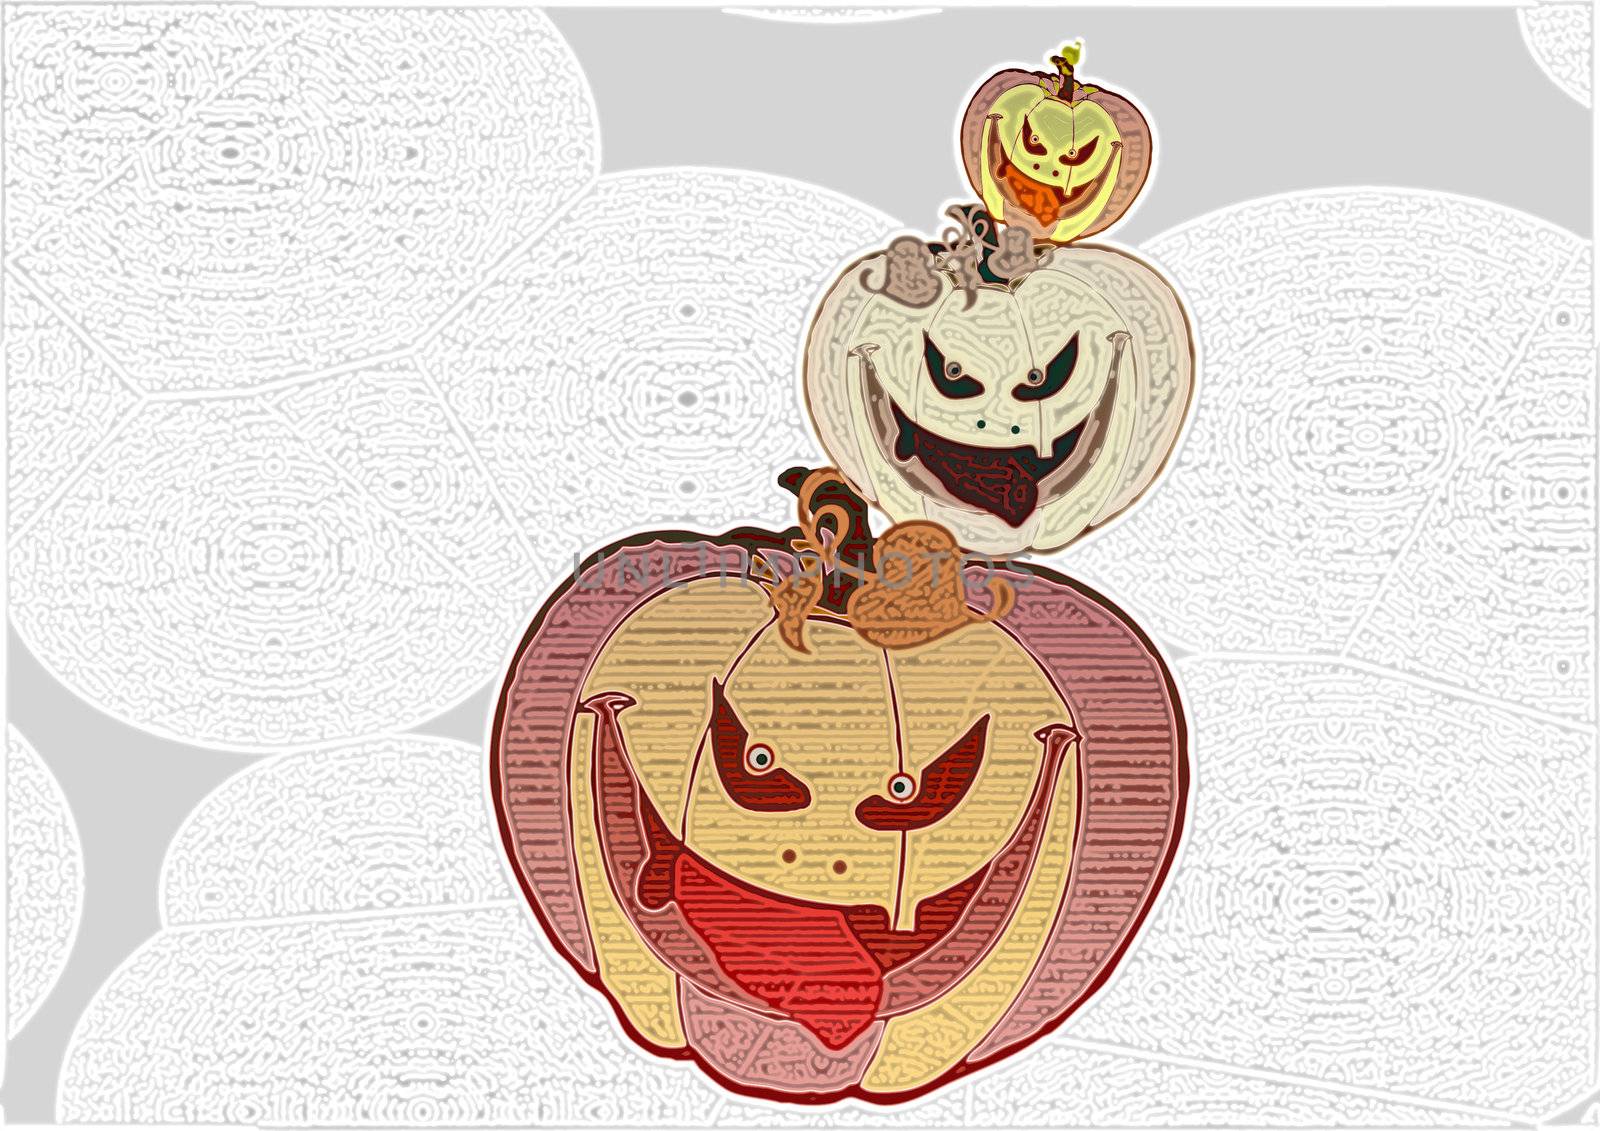 great creative abstract colored bright rich textured image of a merry family pumpkin.